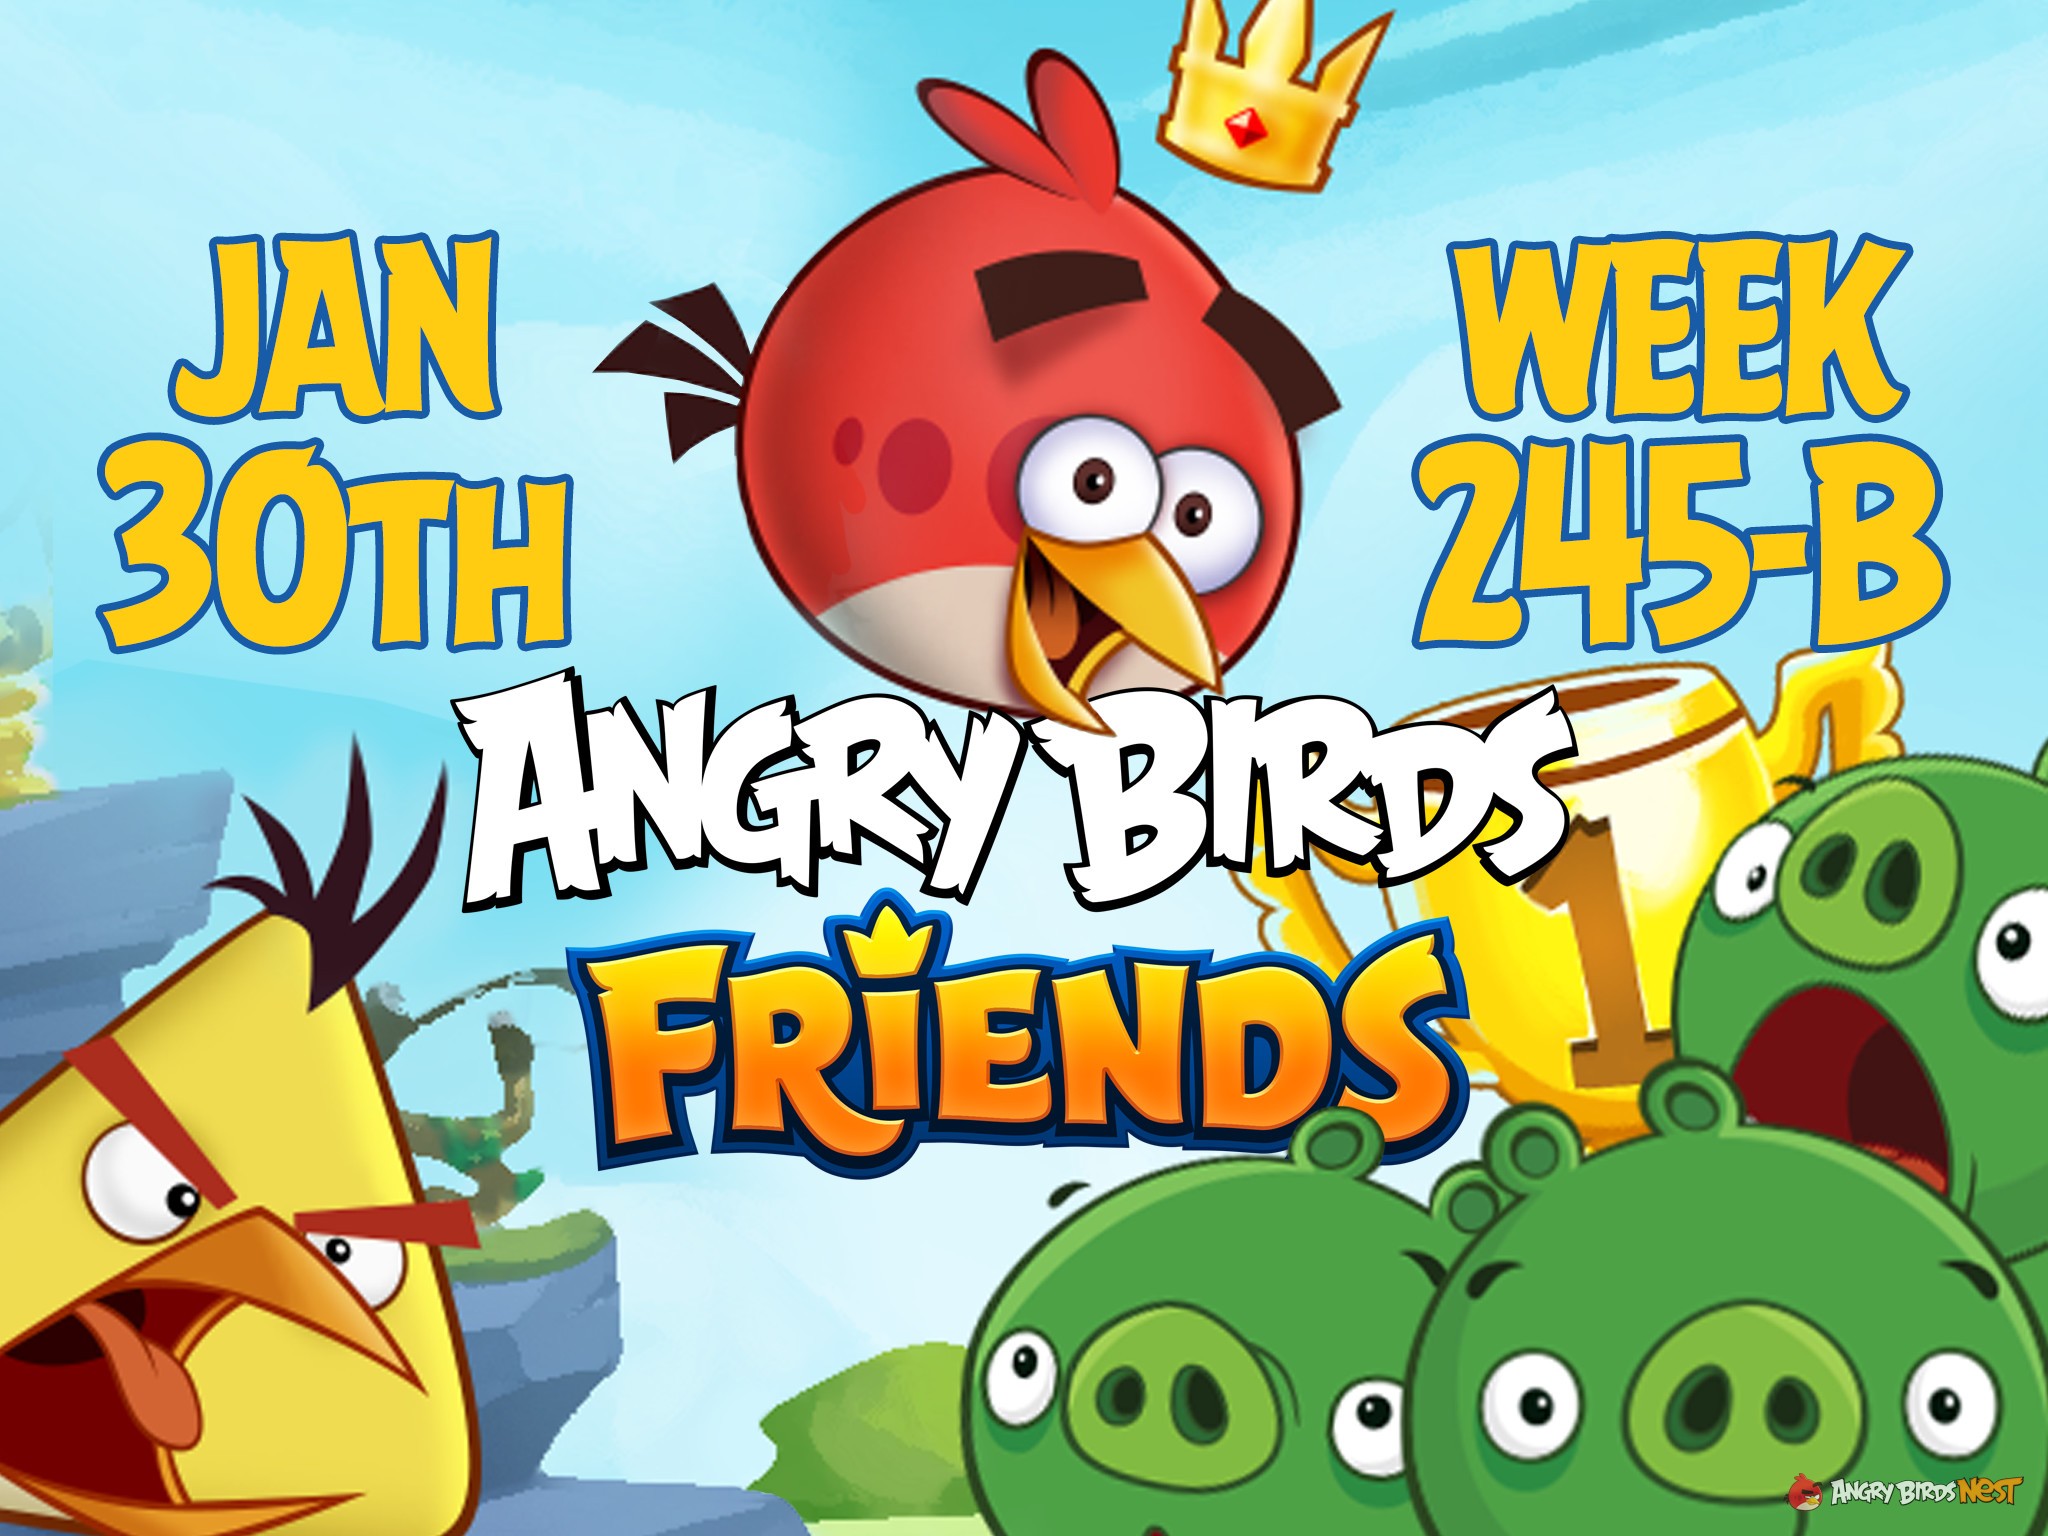 Angry Birds Friends Tournament Week 245-B Feature Image